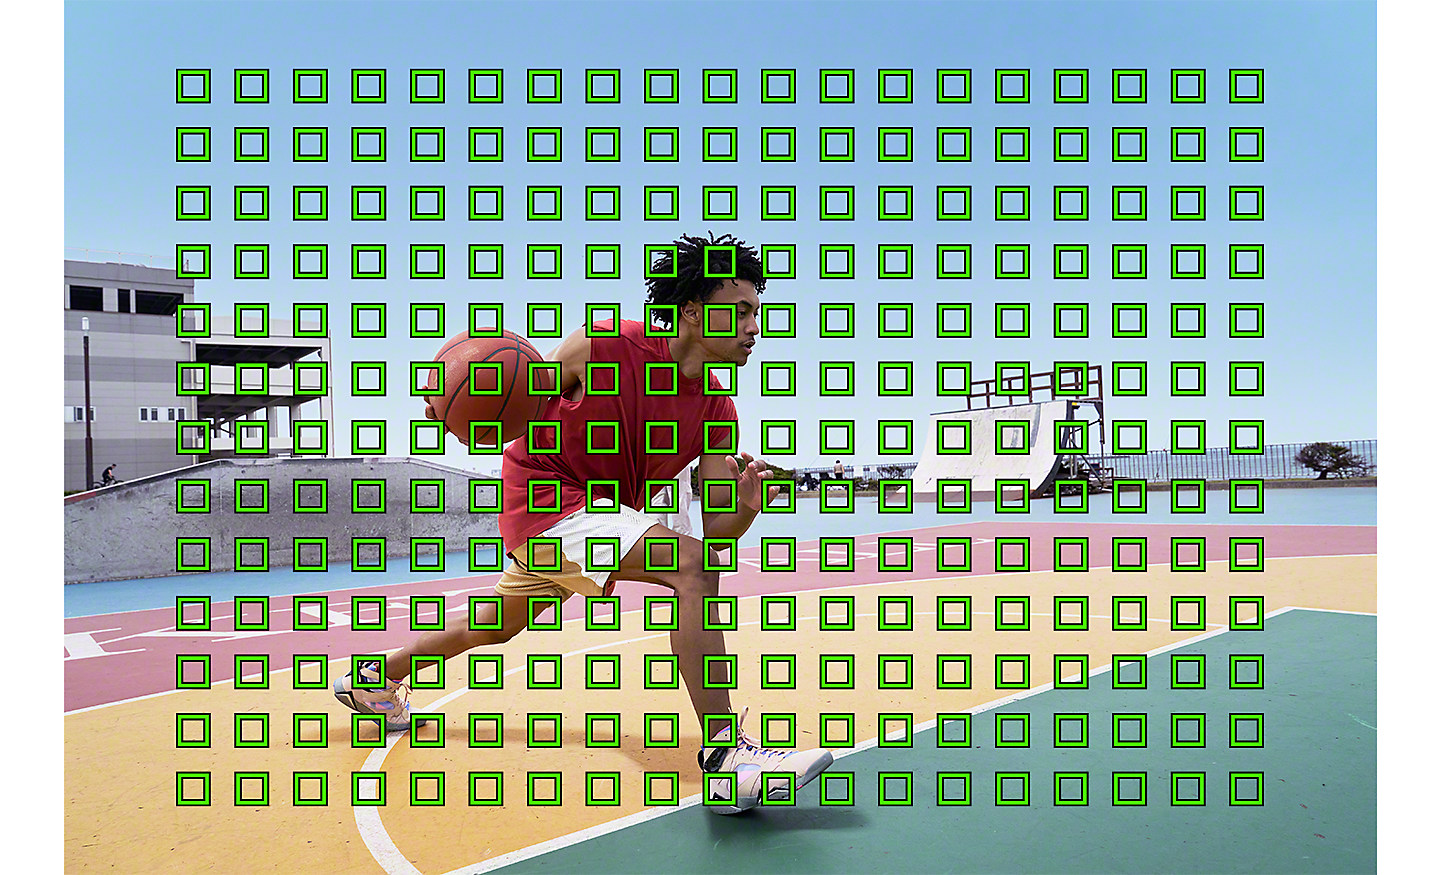 Image of basketball player overlaid with multiple small green squares denoting AF coverage